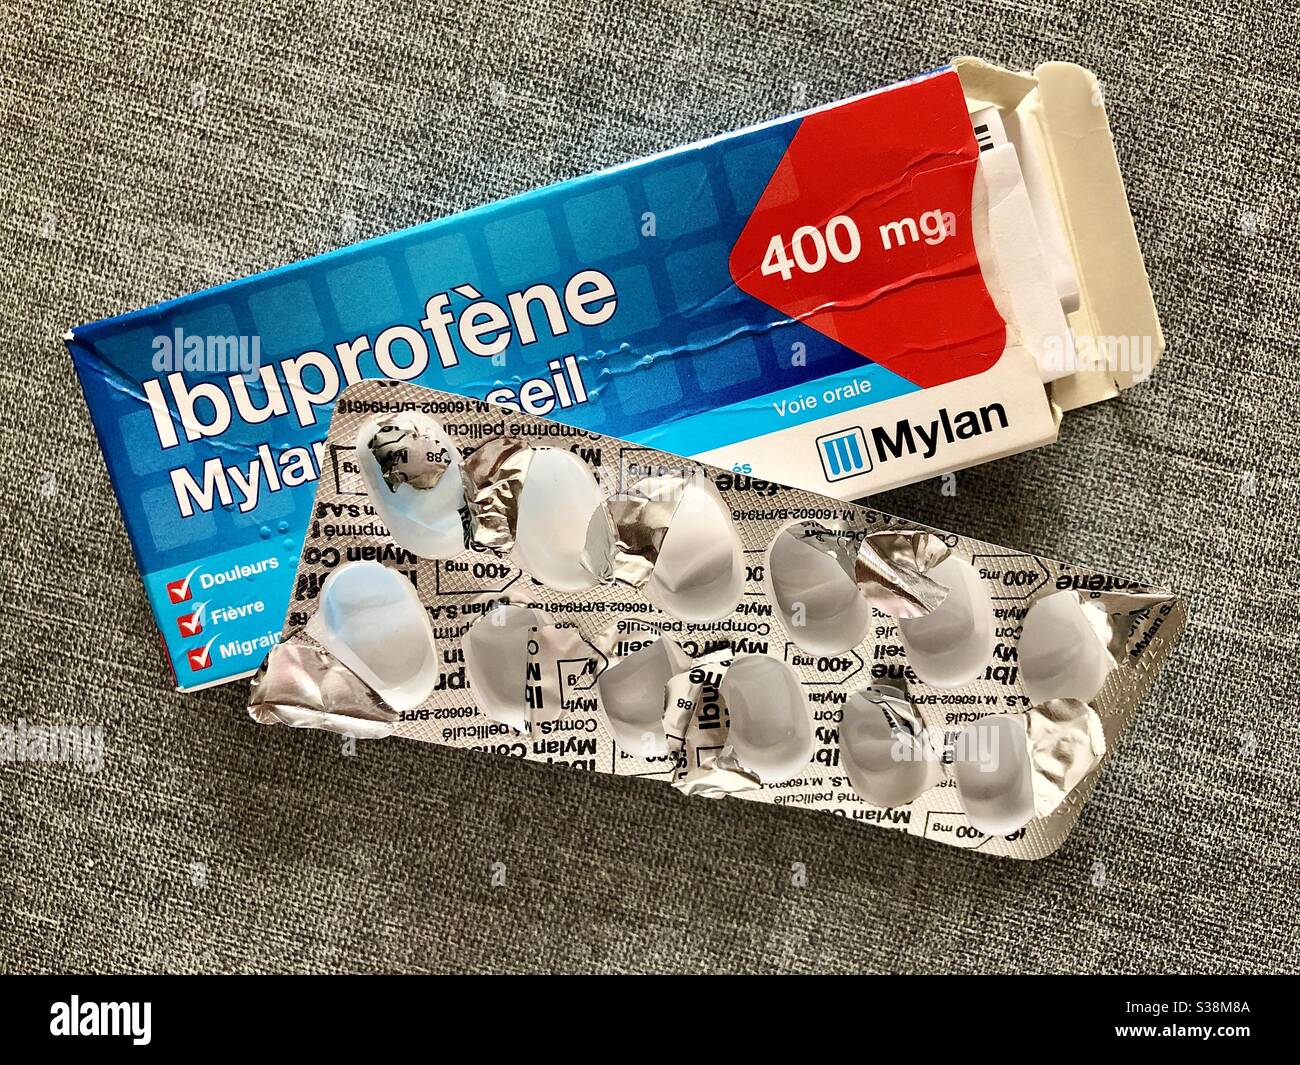 No painkiller tablets left! Stock Photo